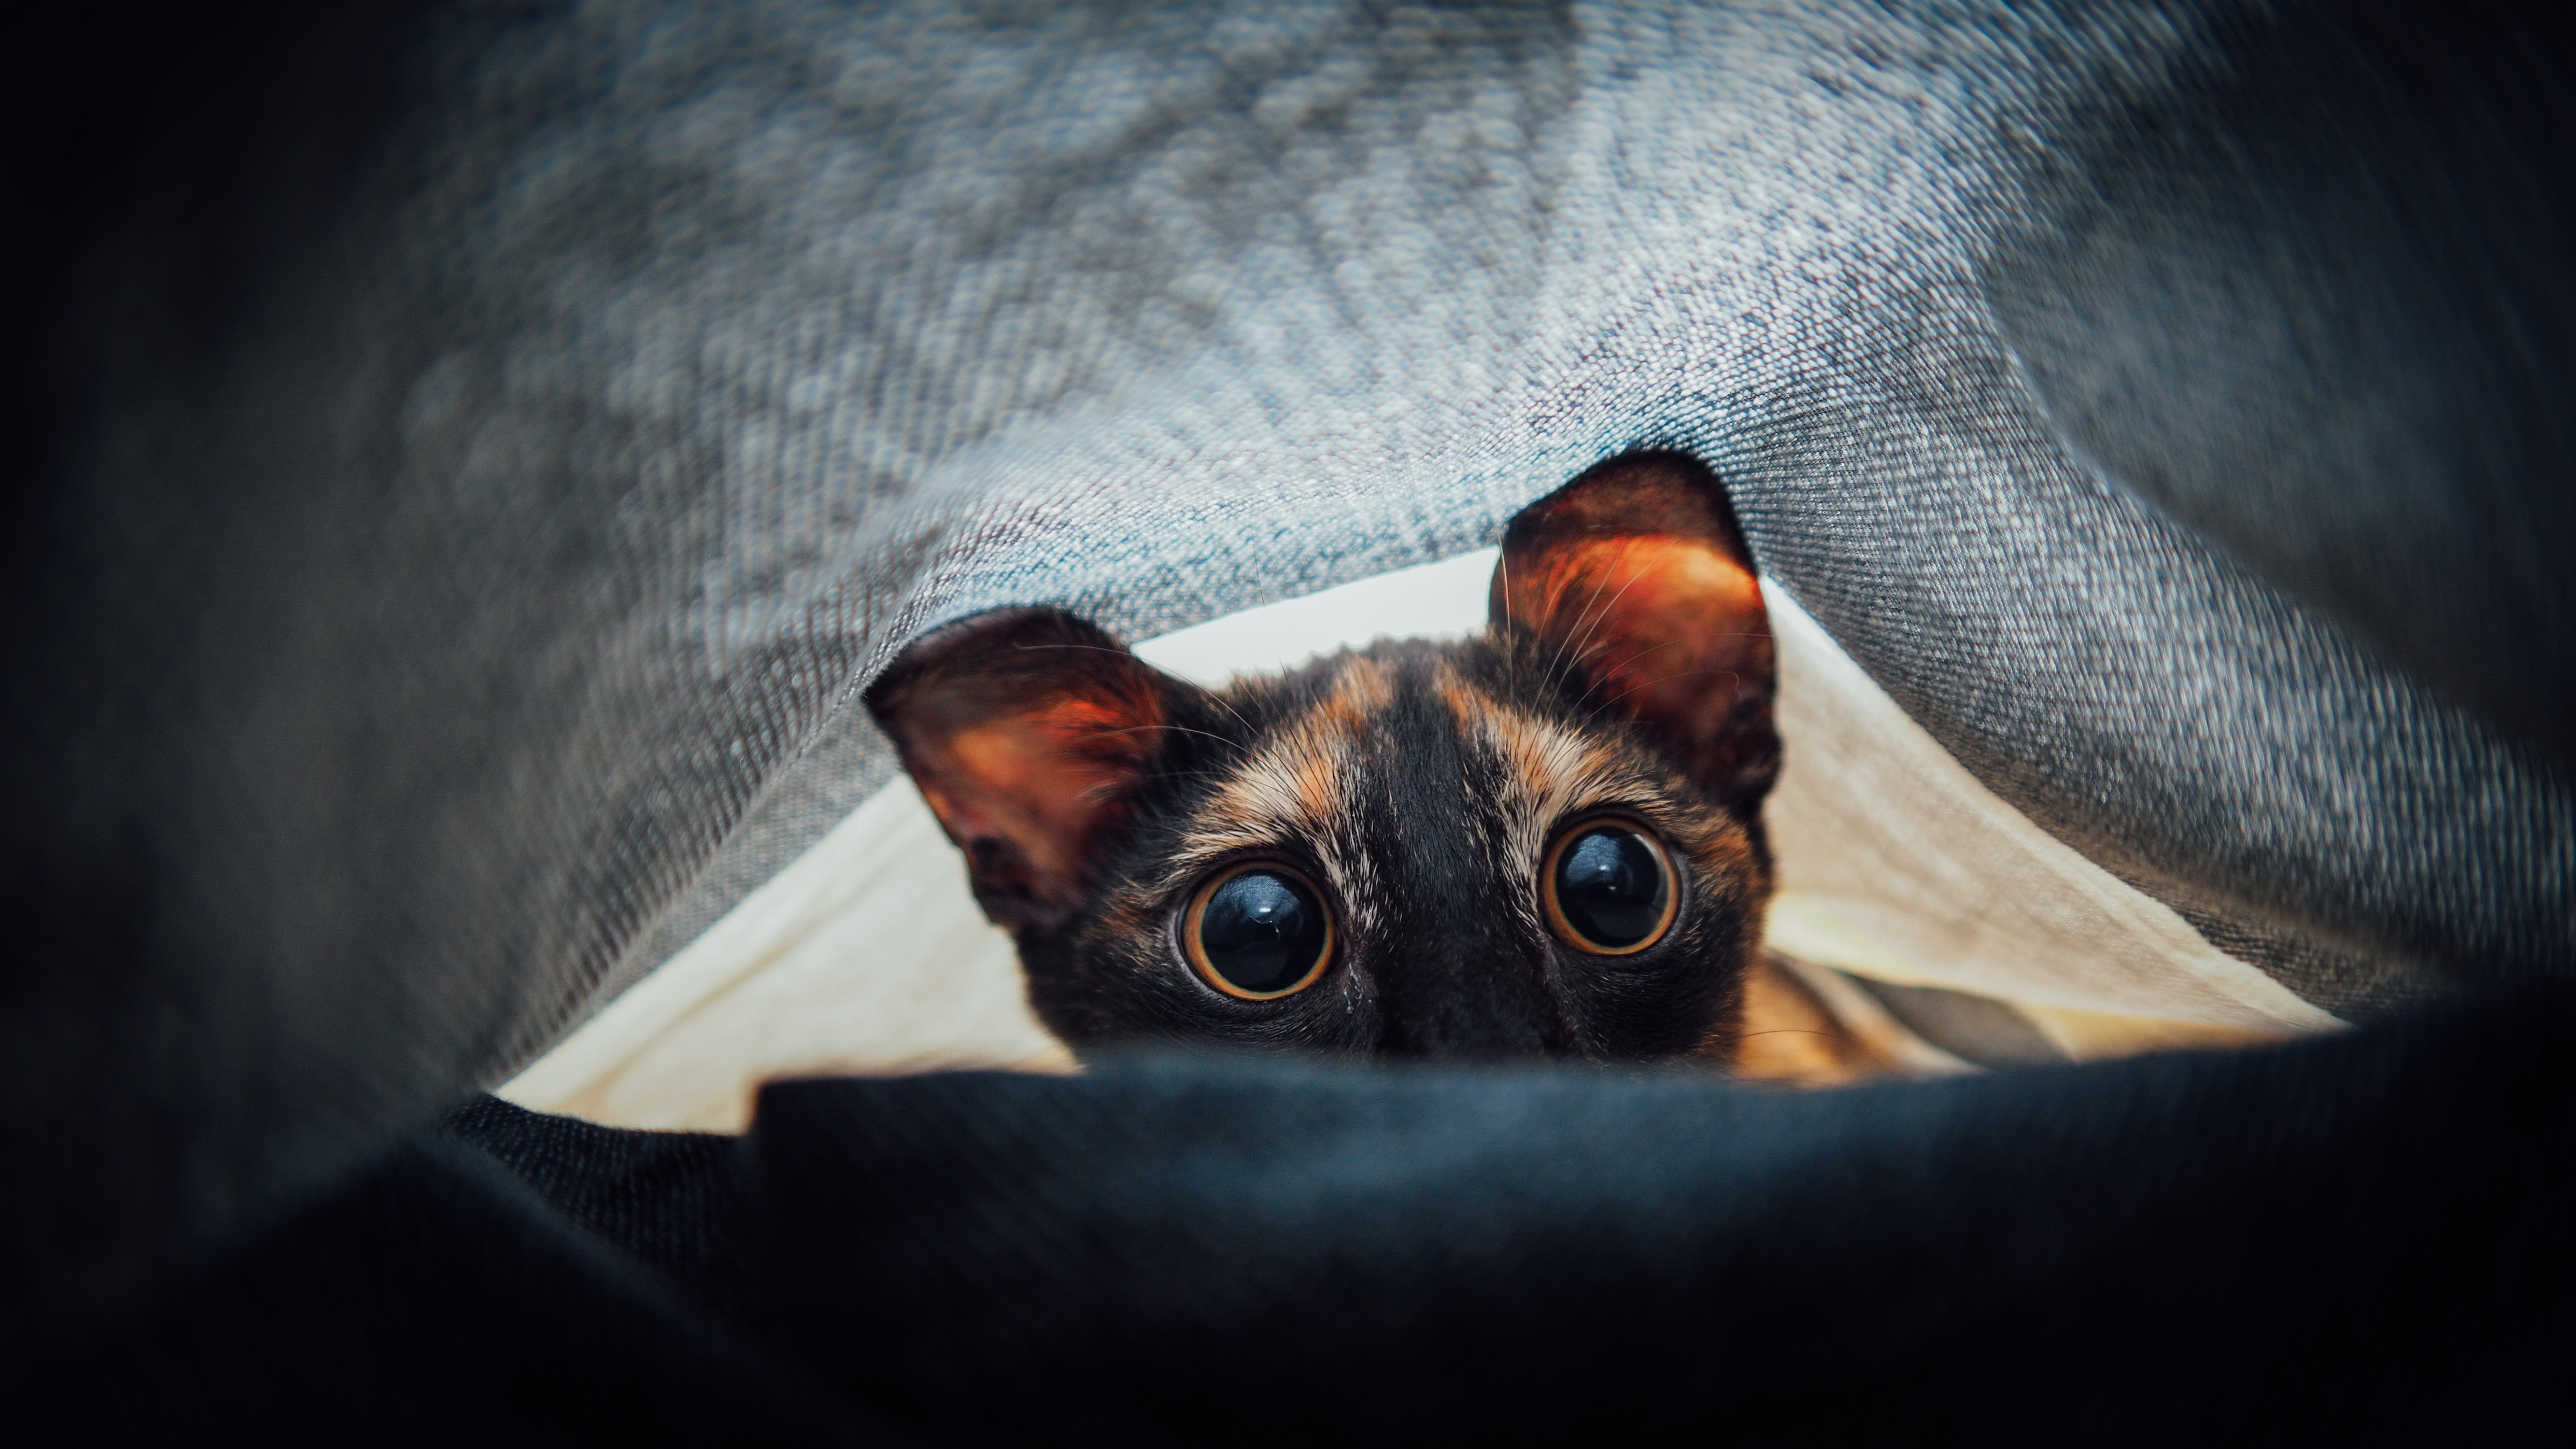 Image: Cat, eyes, muzzle, under the covers